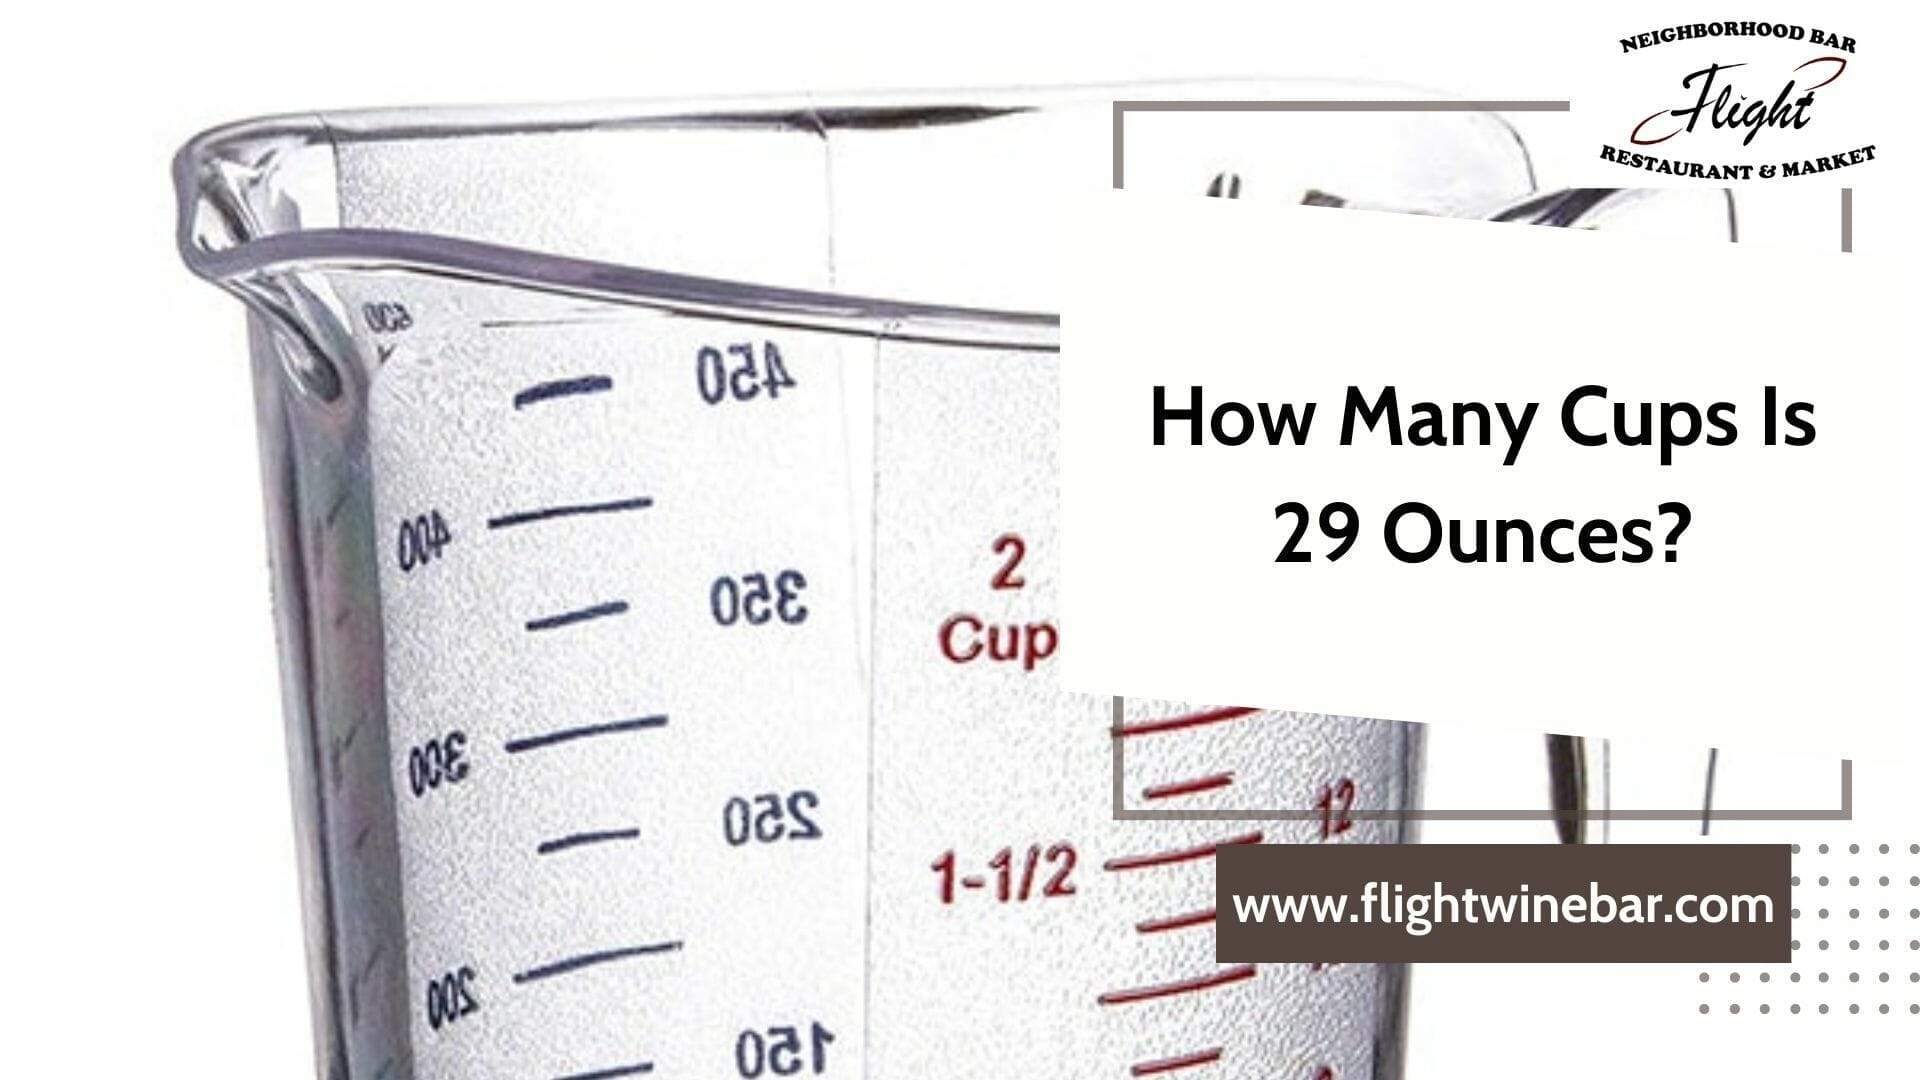 How Many Cups Is 29 Ounces